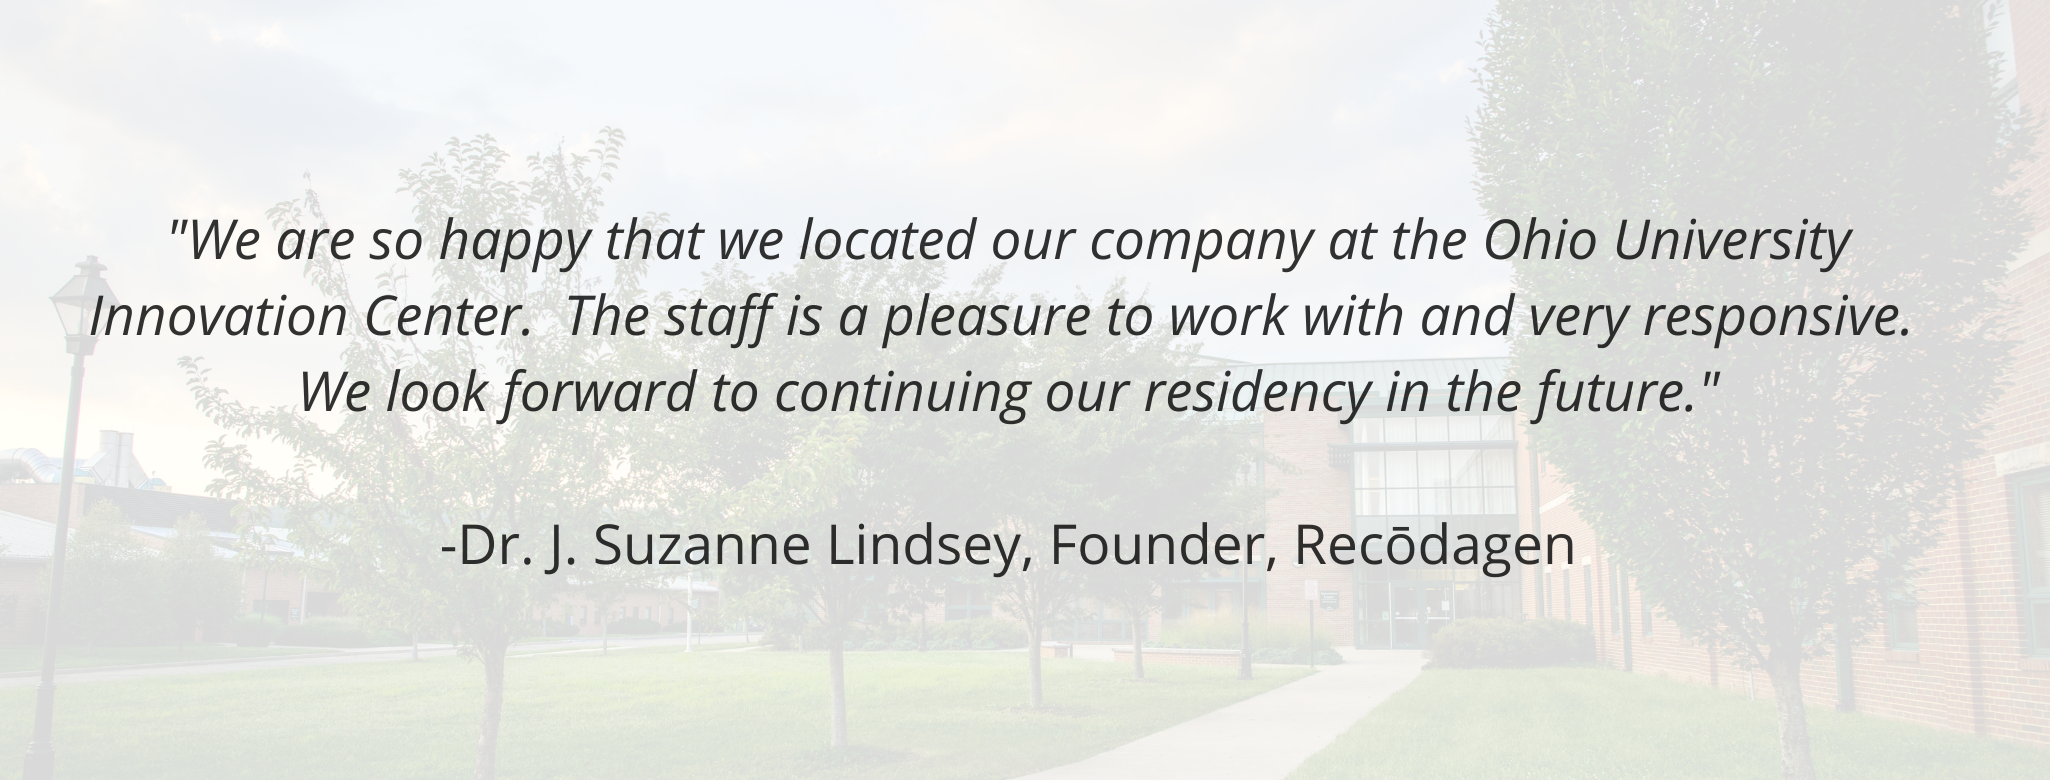 "We are so happy that we located our company at the Ohio University Innovation Center.  The staff is a pleasure to work with and very responsive.  We look forward to continuing our residency in the future."   -Dr. J. Suzanne Lindsey, Founder, Recōdagen